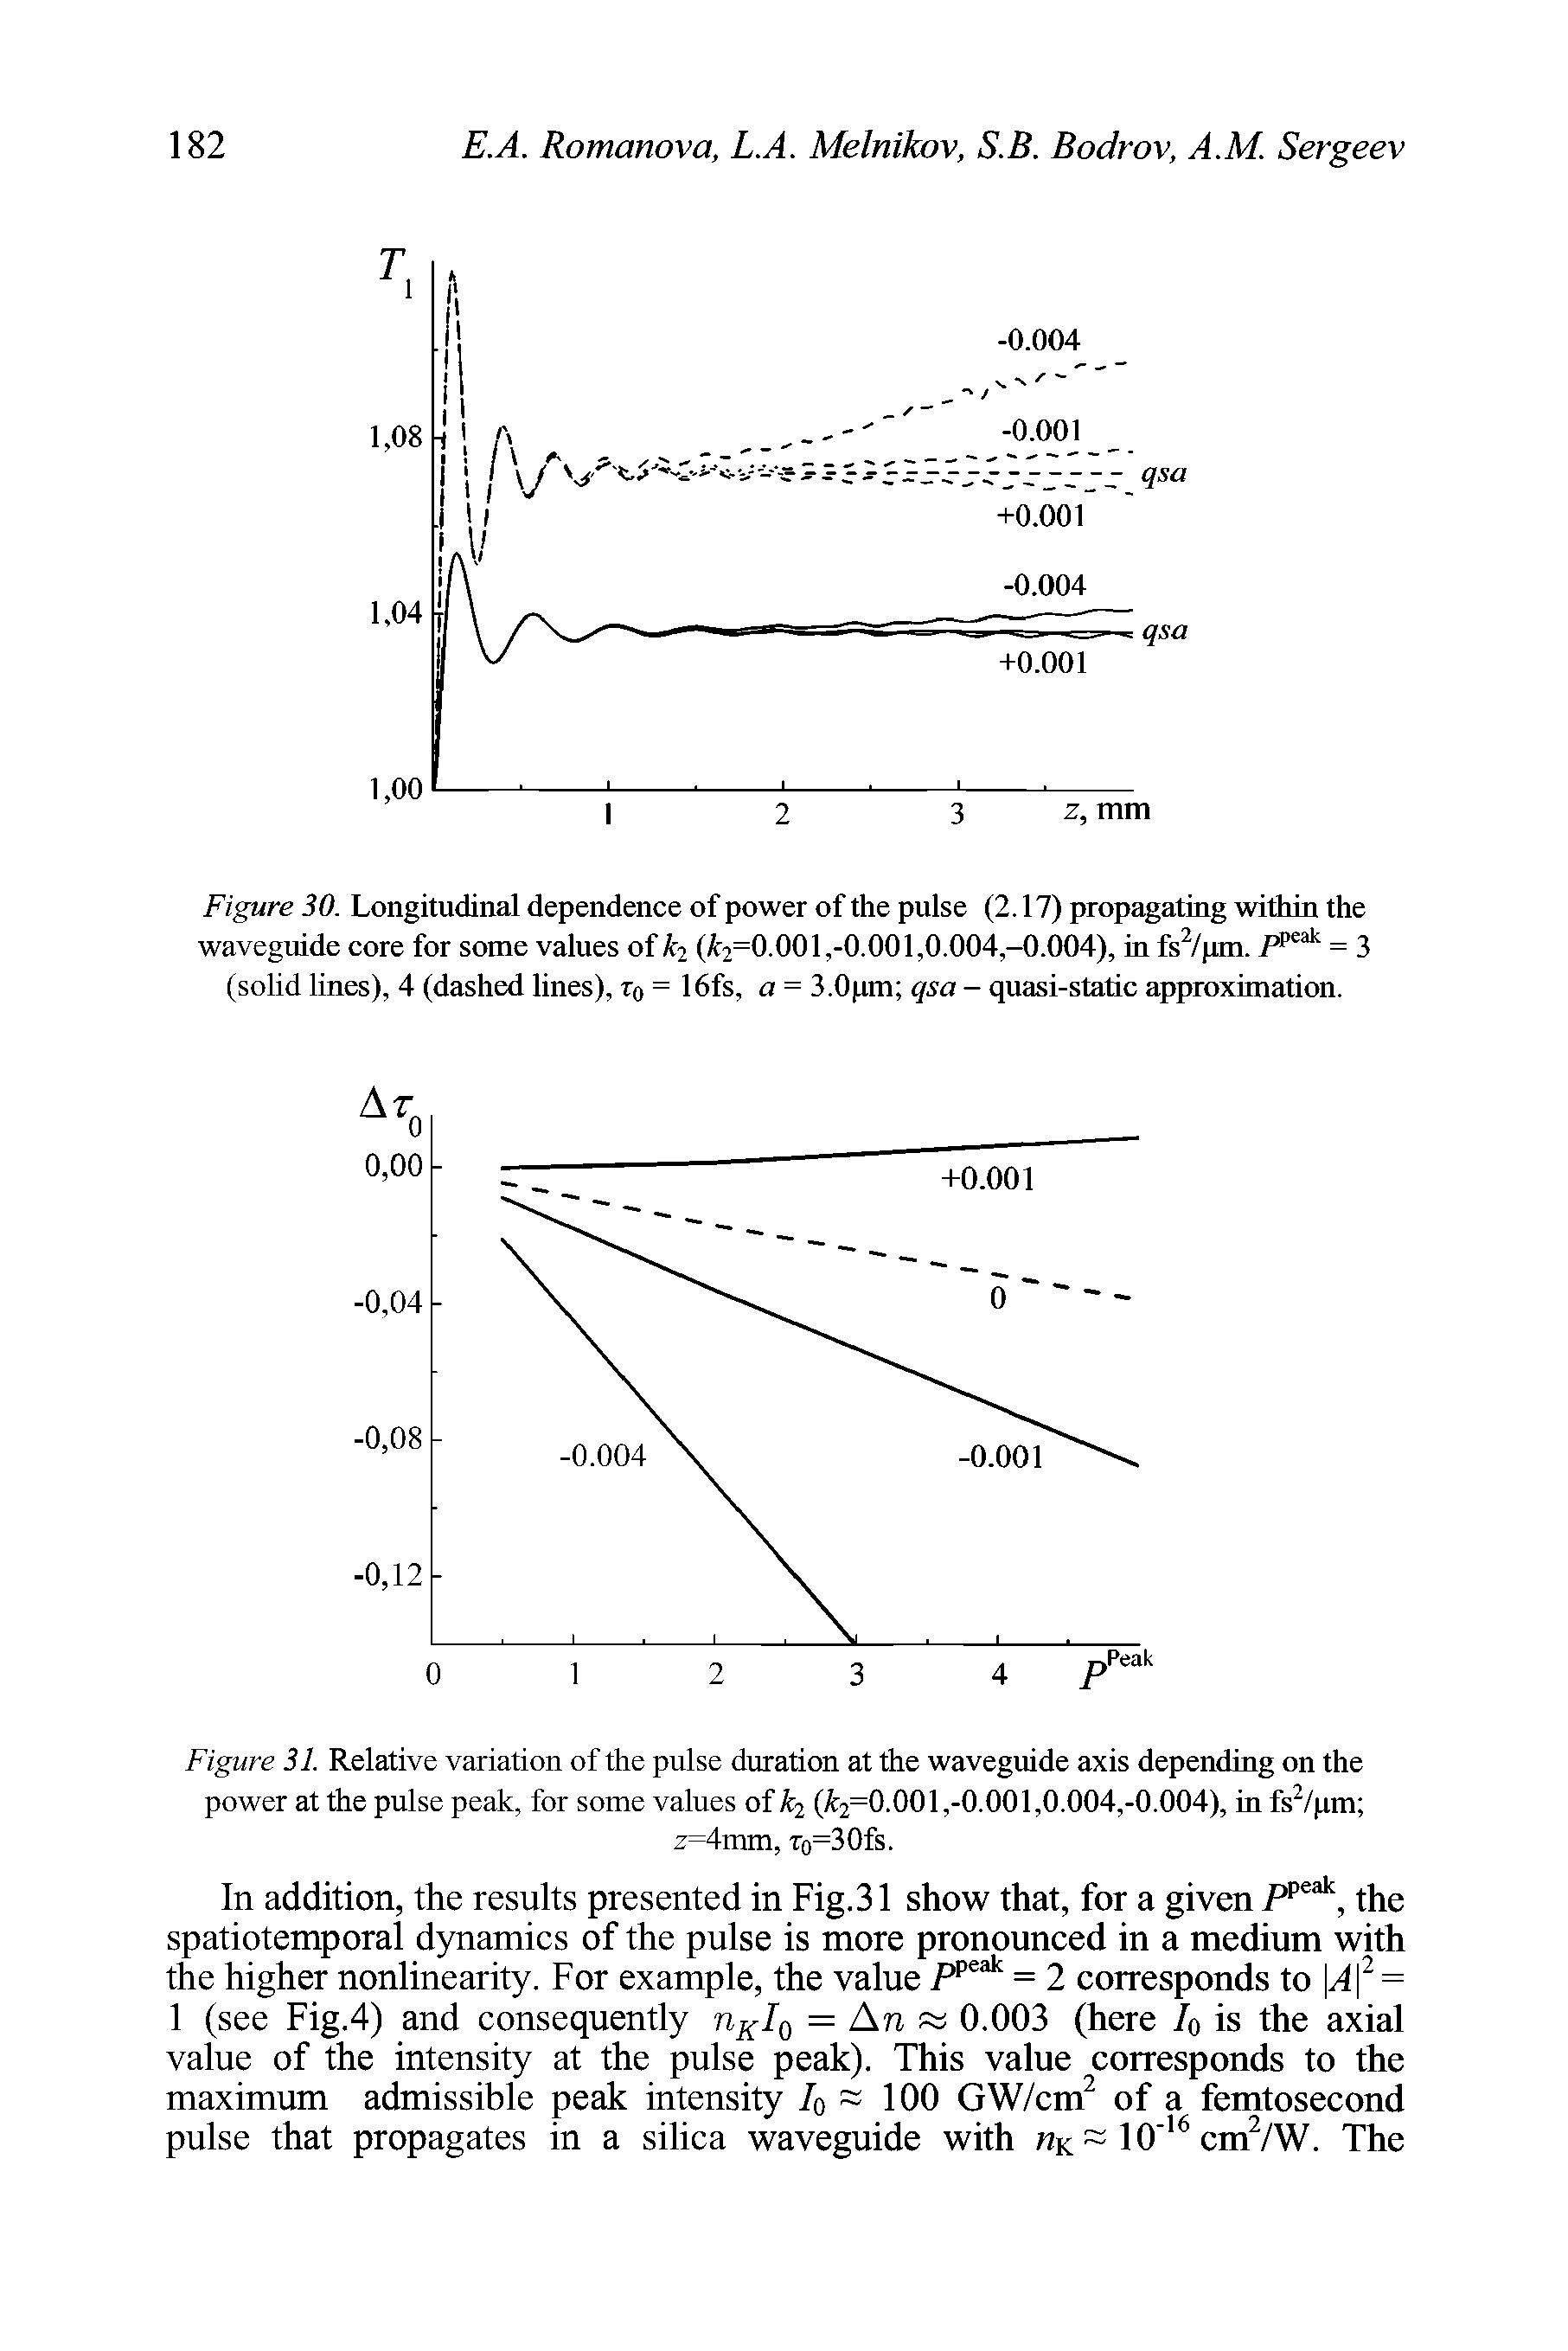 Figure 30. Longitudinal dependence of power of the pulse (2.17) propagating within the waveguide core for some values of 2 (A 2=0 001r0 001,0 004-0.004), in fs /pm. = 3 (solid lines), 4 (dashed lines), tq = 16fs, a = 3.0pm qsa - quasi-static approximation.